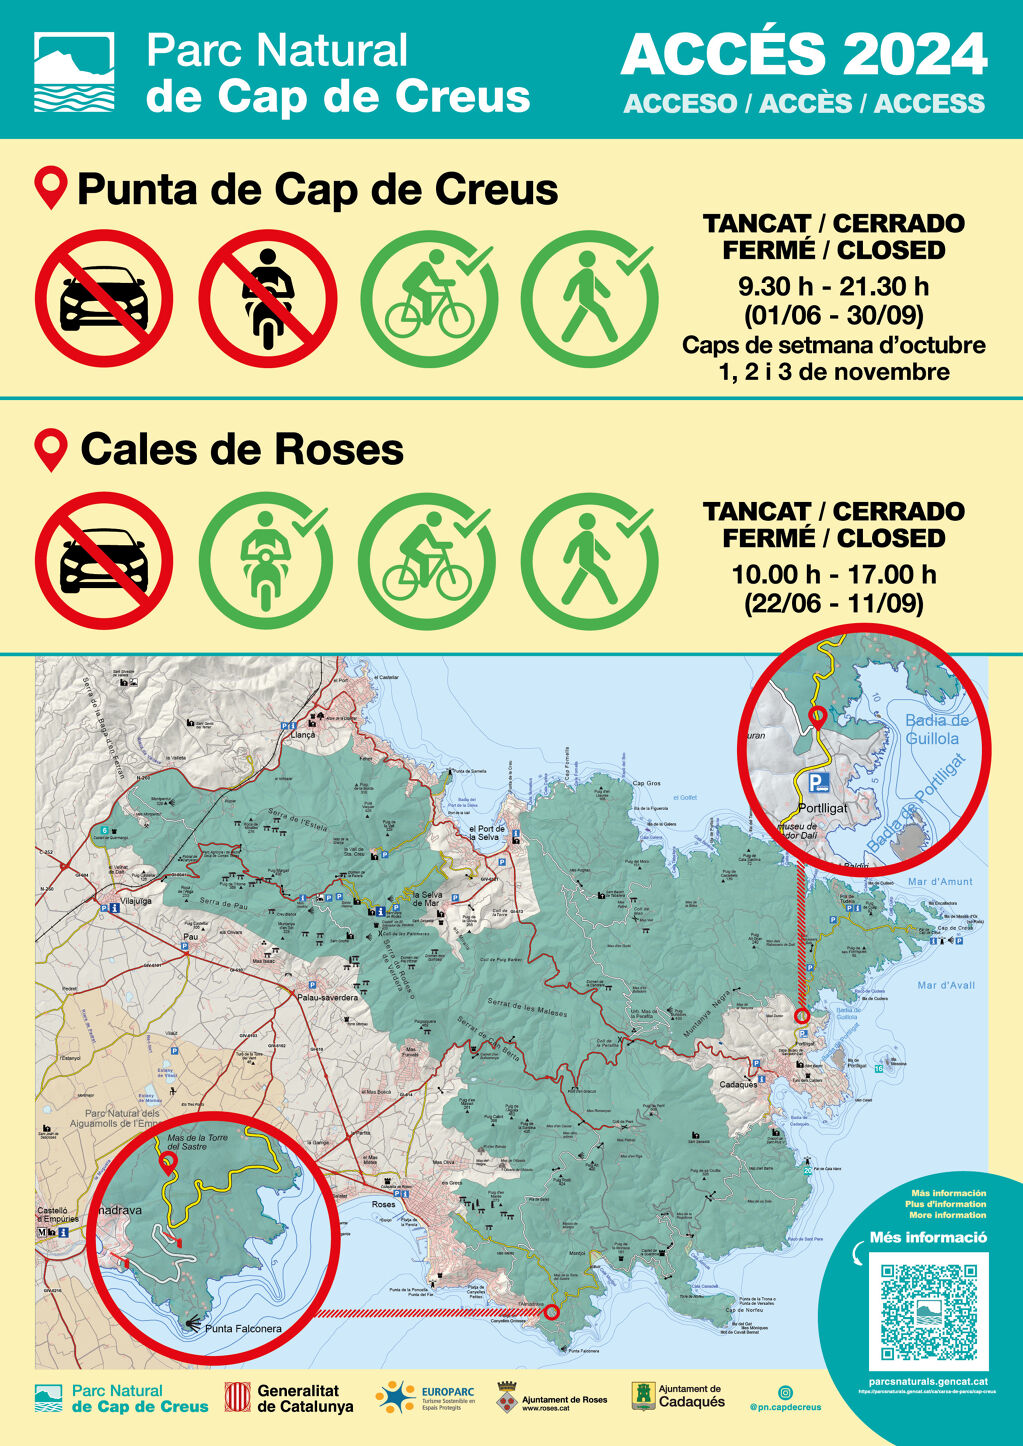 Vehicle access to the Cap de Creus National Park from Roses, closed from June 22 to September 11